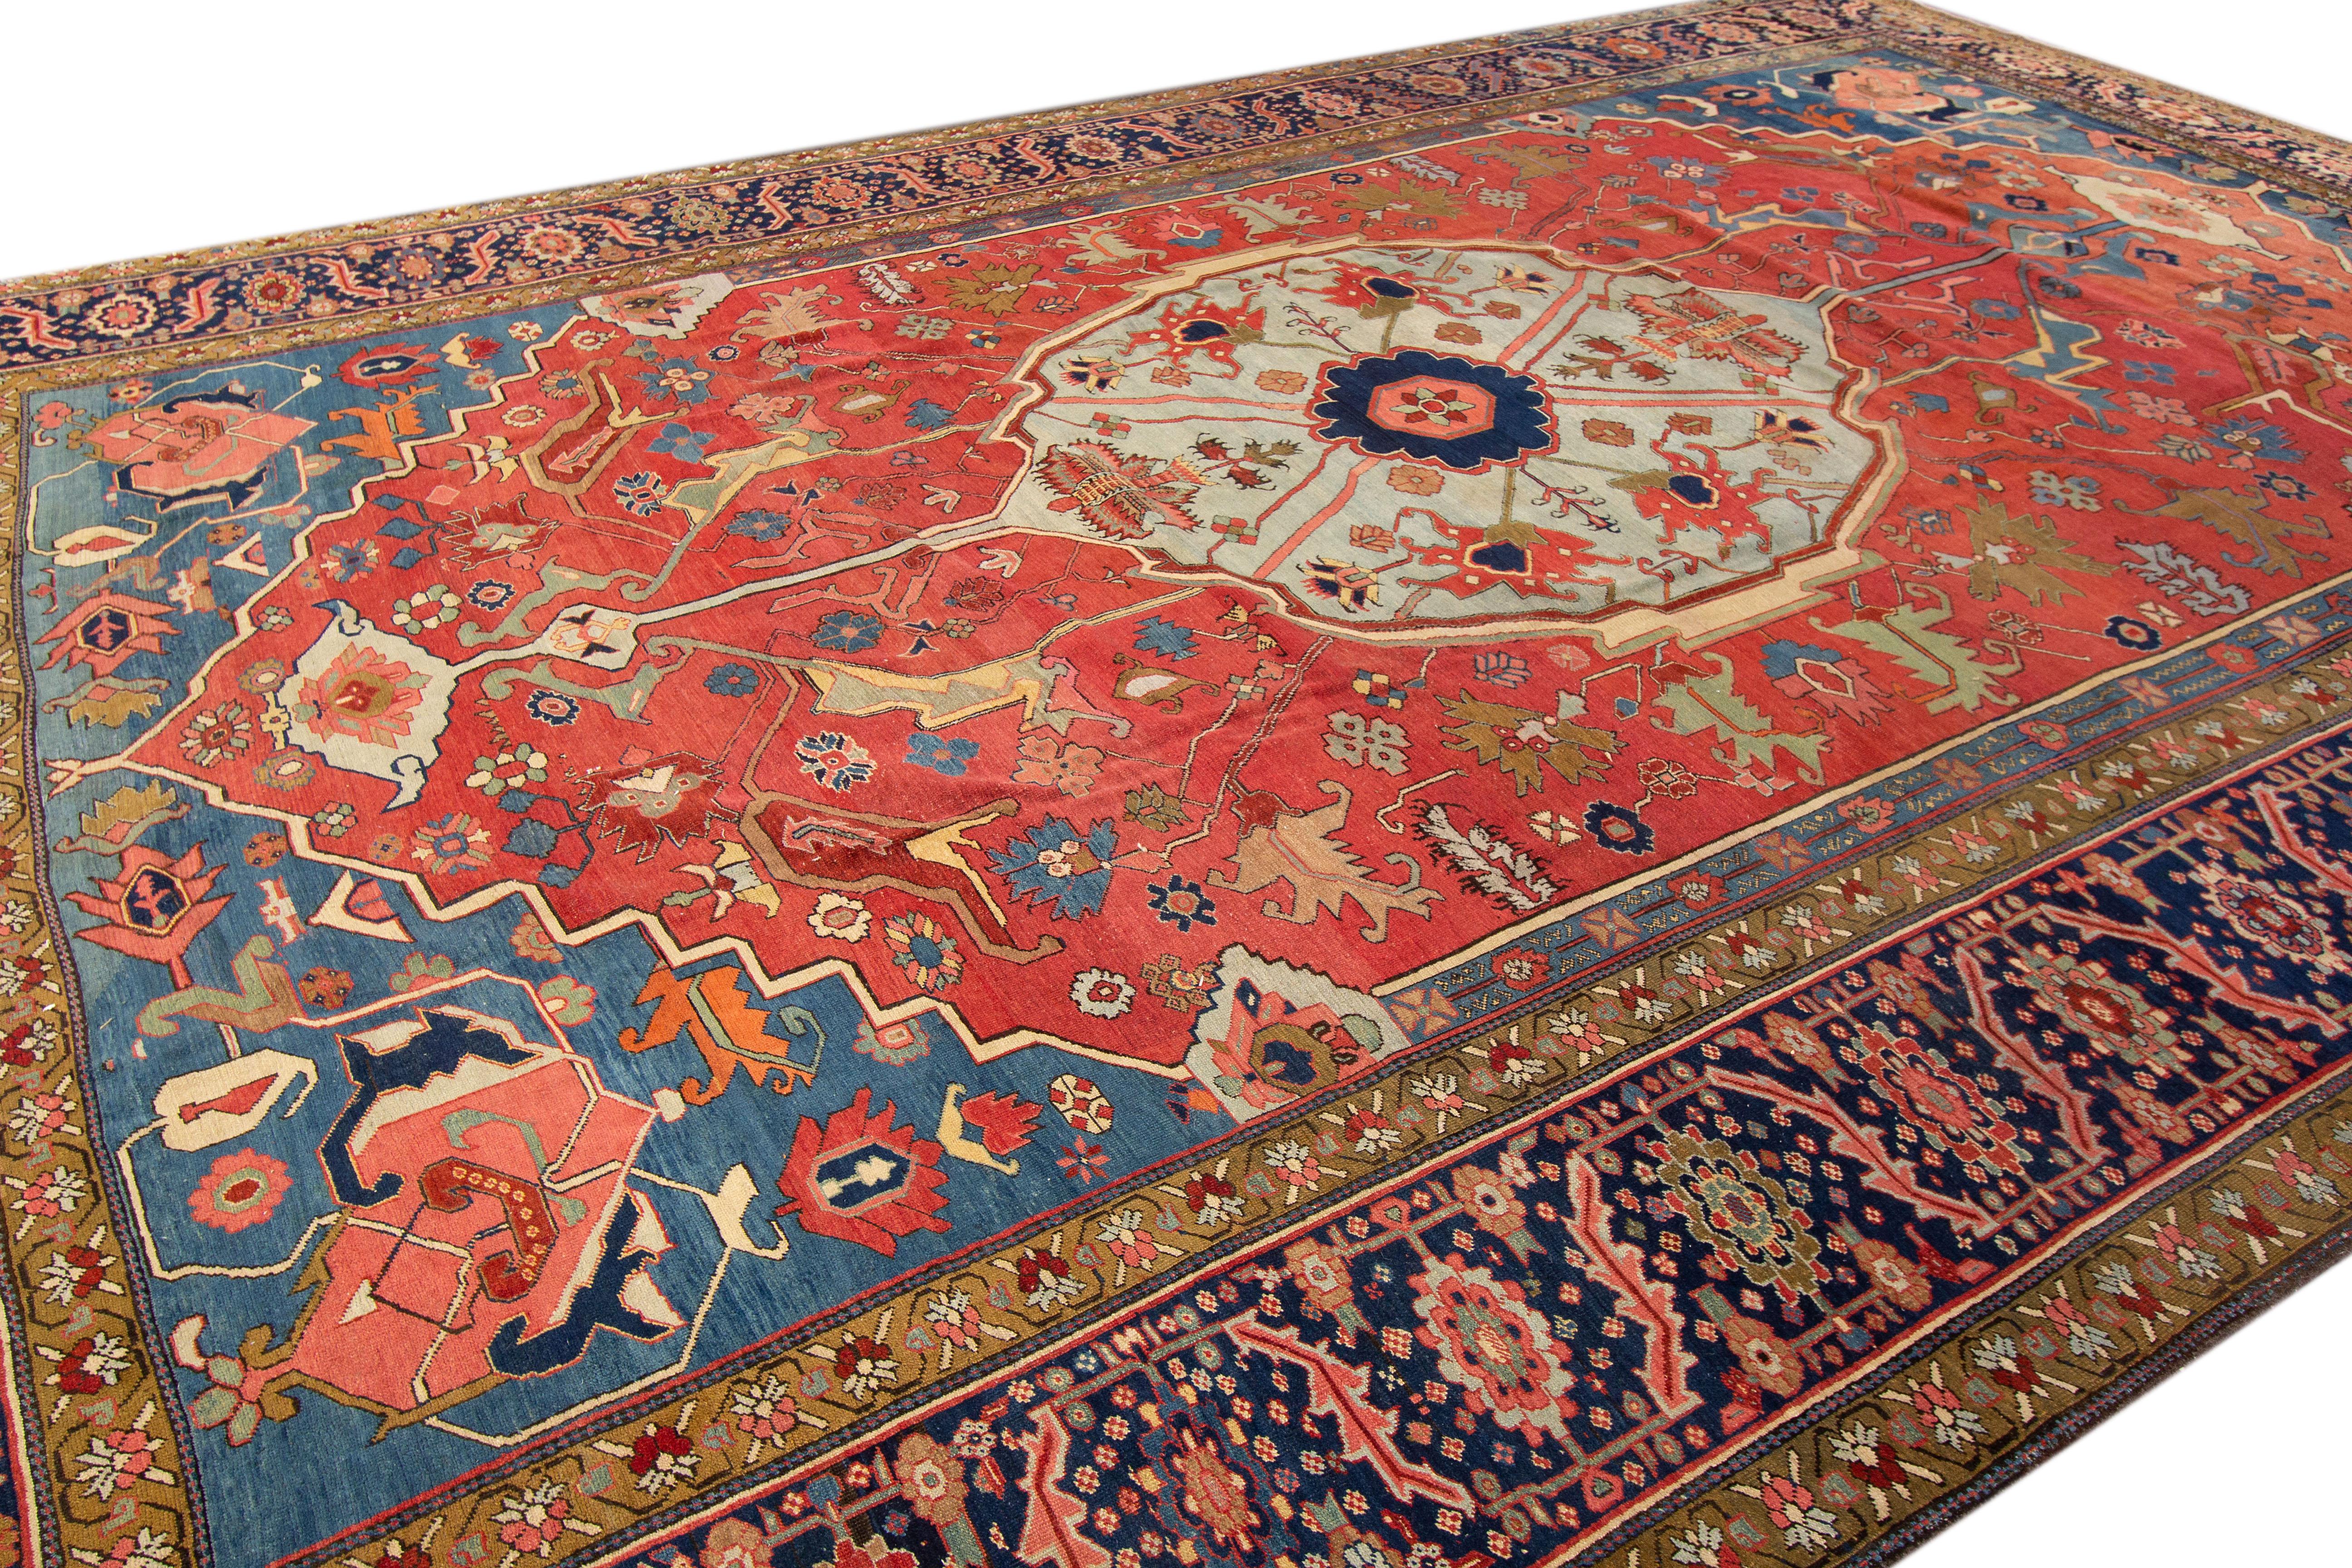 A one-of-a-kind antique Serapi rug with a beautiful geometric medallion design is the perfect addition to your home.

This rug measures 11'8